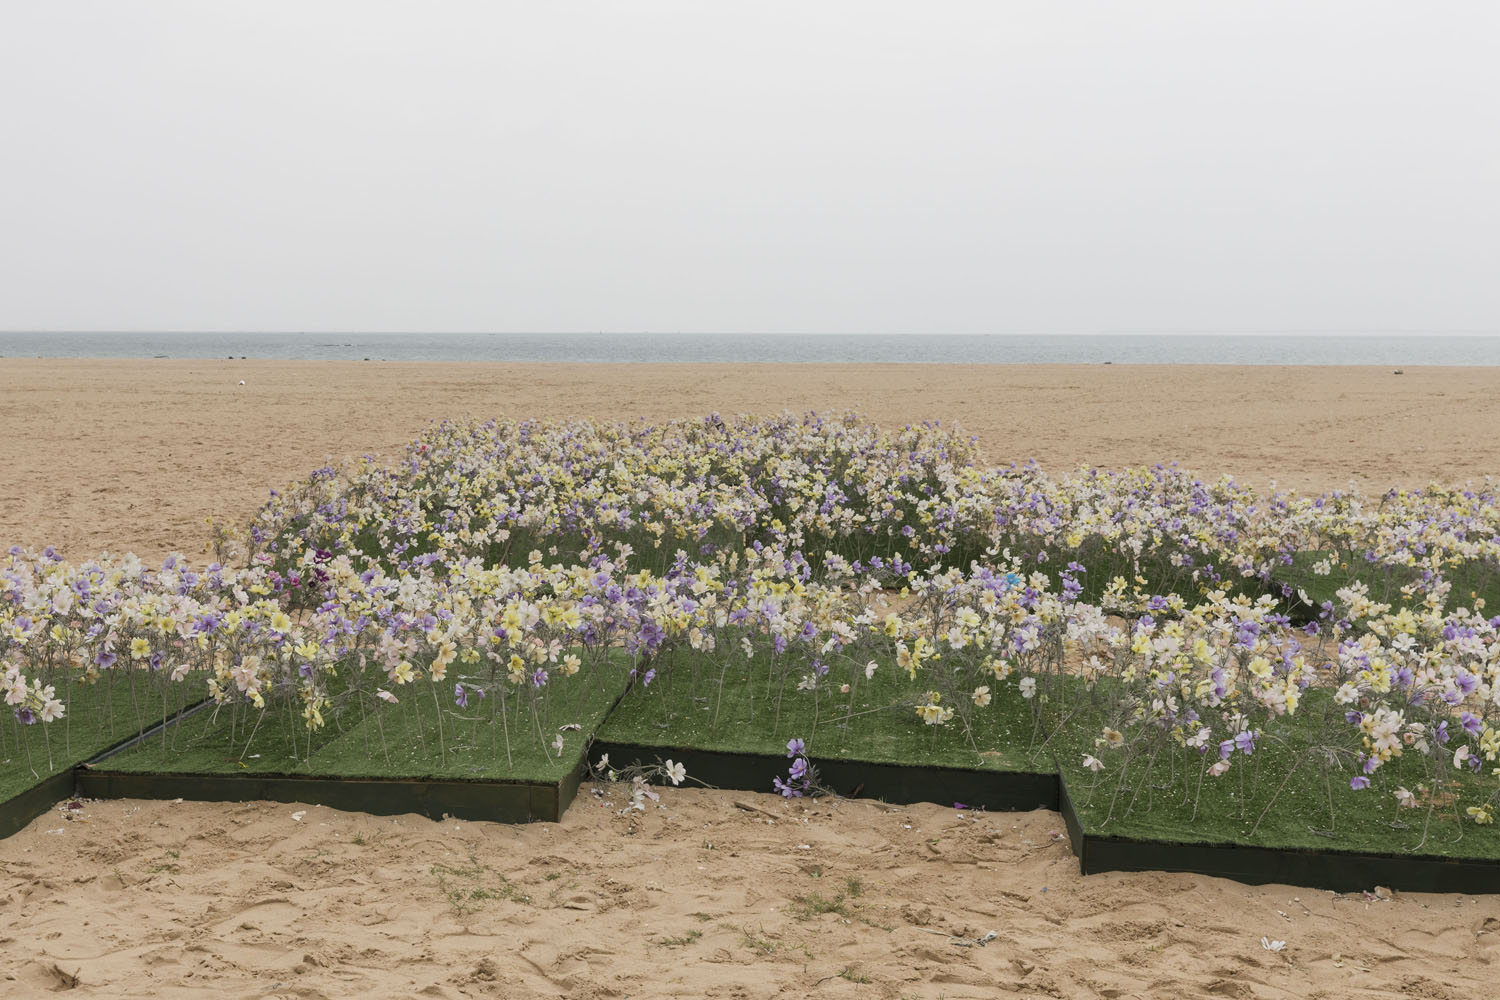 Imitation flower beds used for wedding photography at Guanyinshan Fantasy Beach. Xiamen, China. 2018.